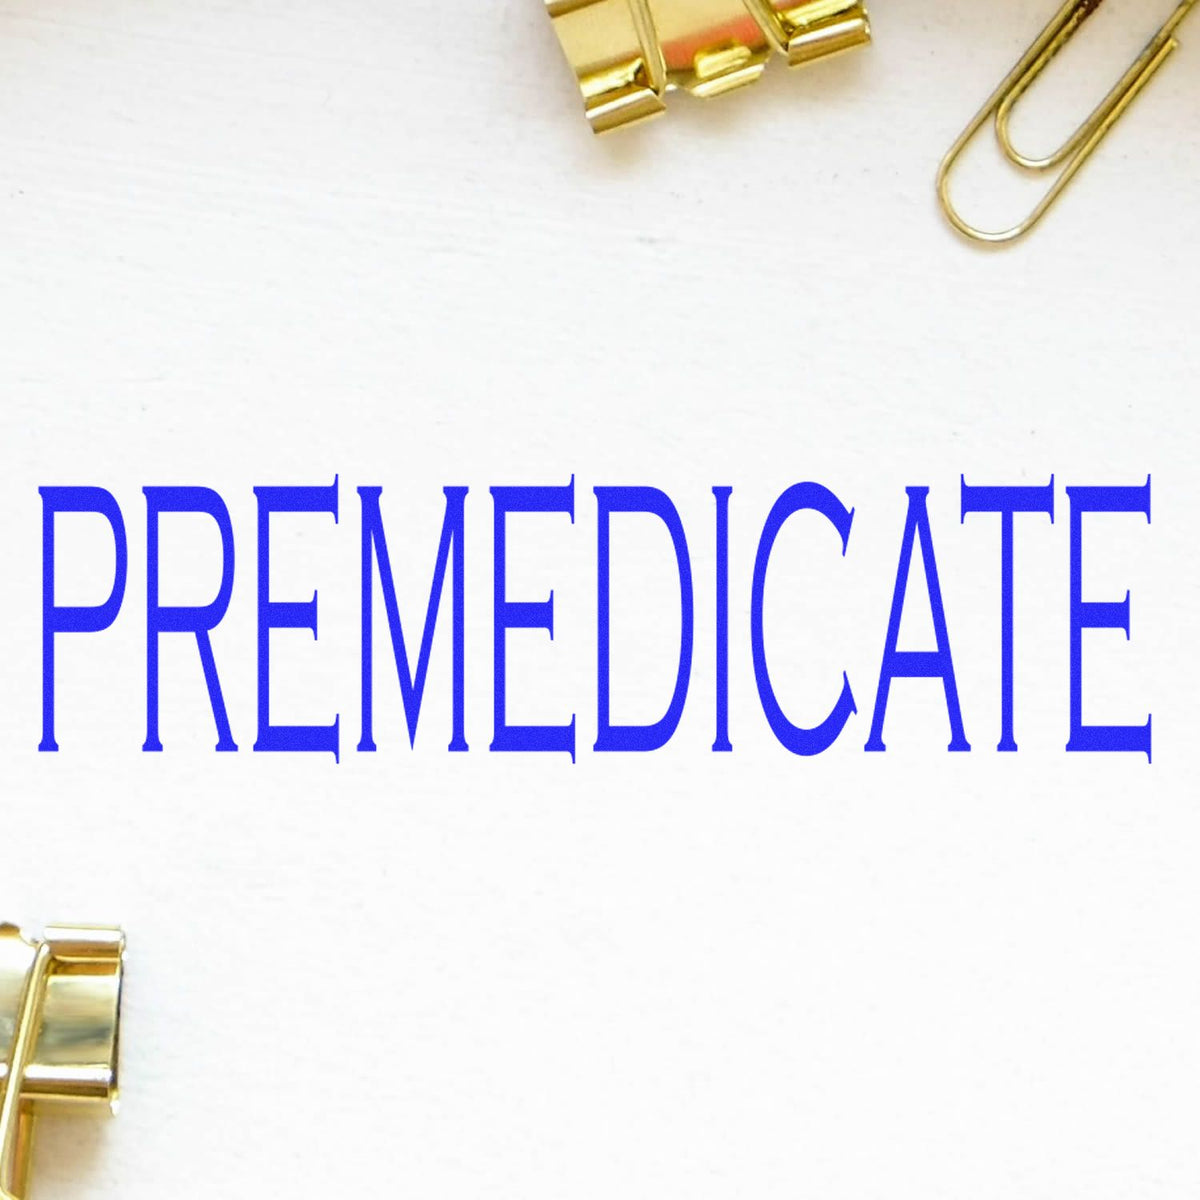 Large Premedicate Rubber Stamp In Use Photo